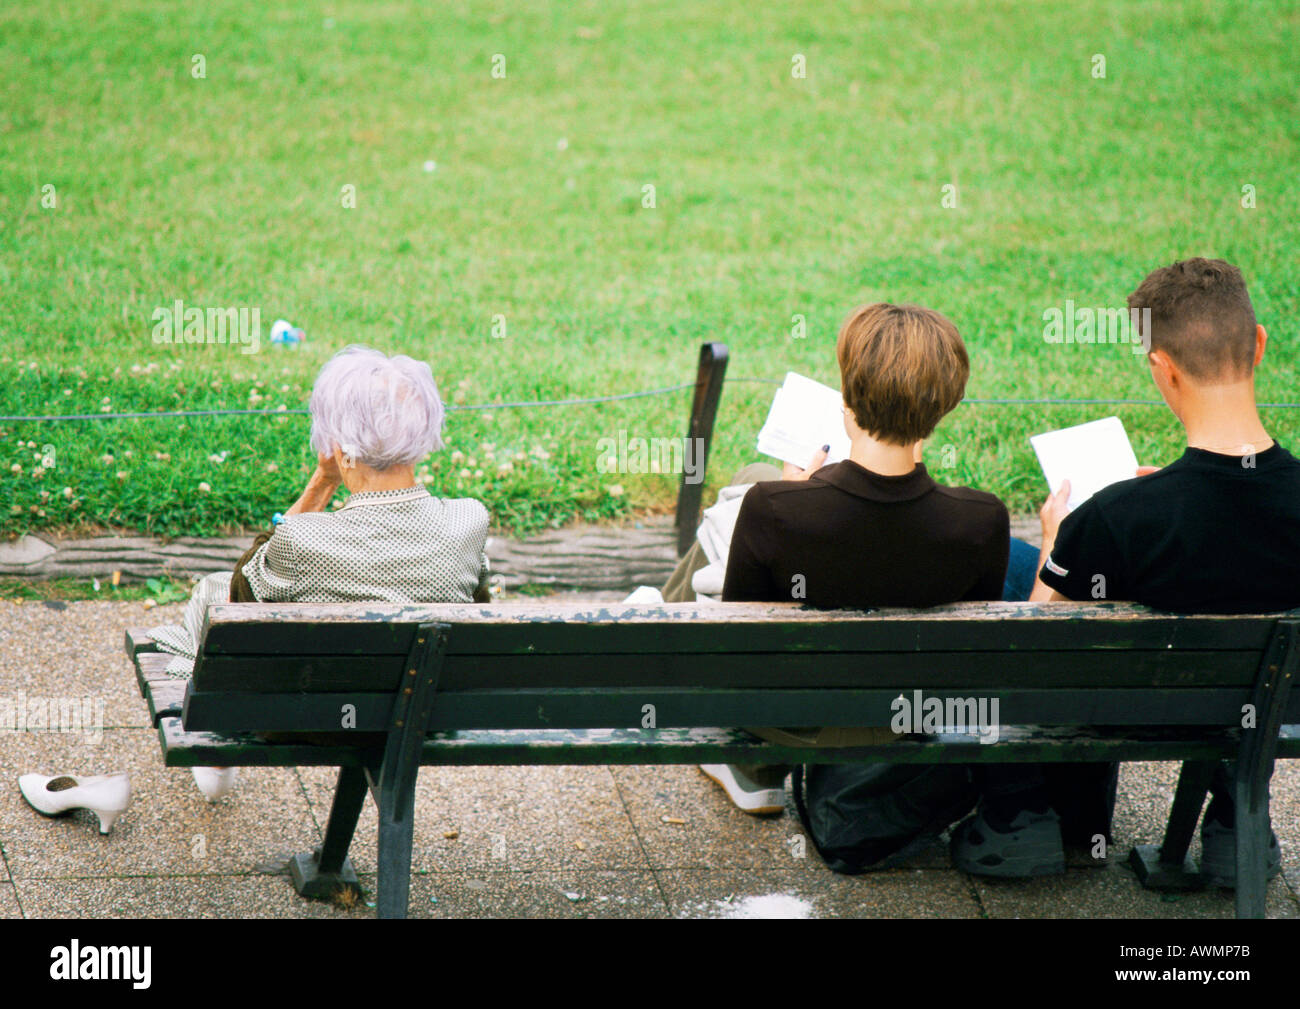 Three people sitting on bench, rear view Stock Photo